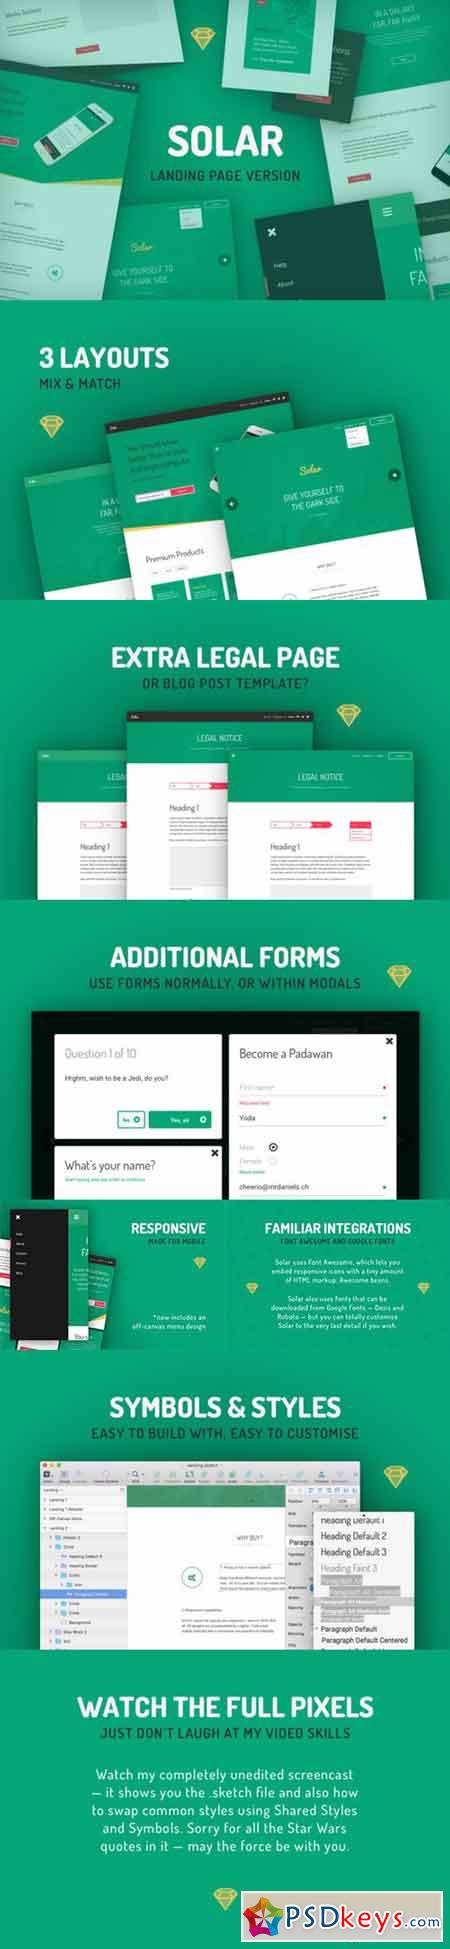 Solar [.sketch] for Landing Pages 668399